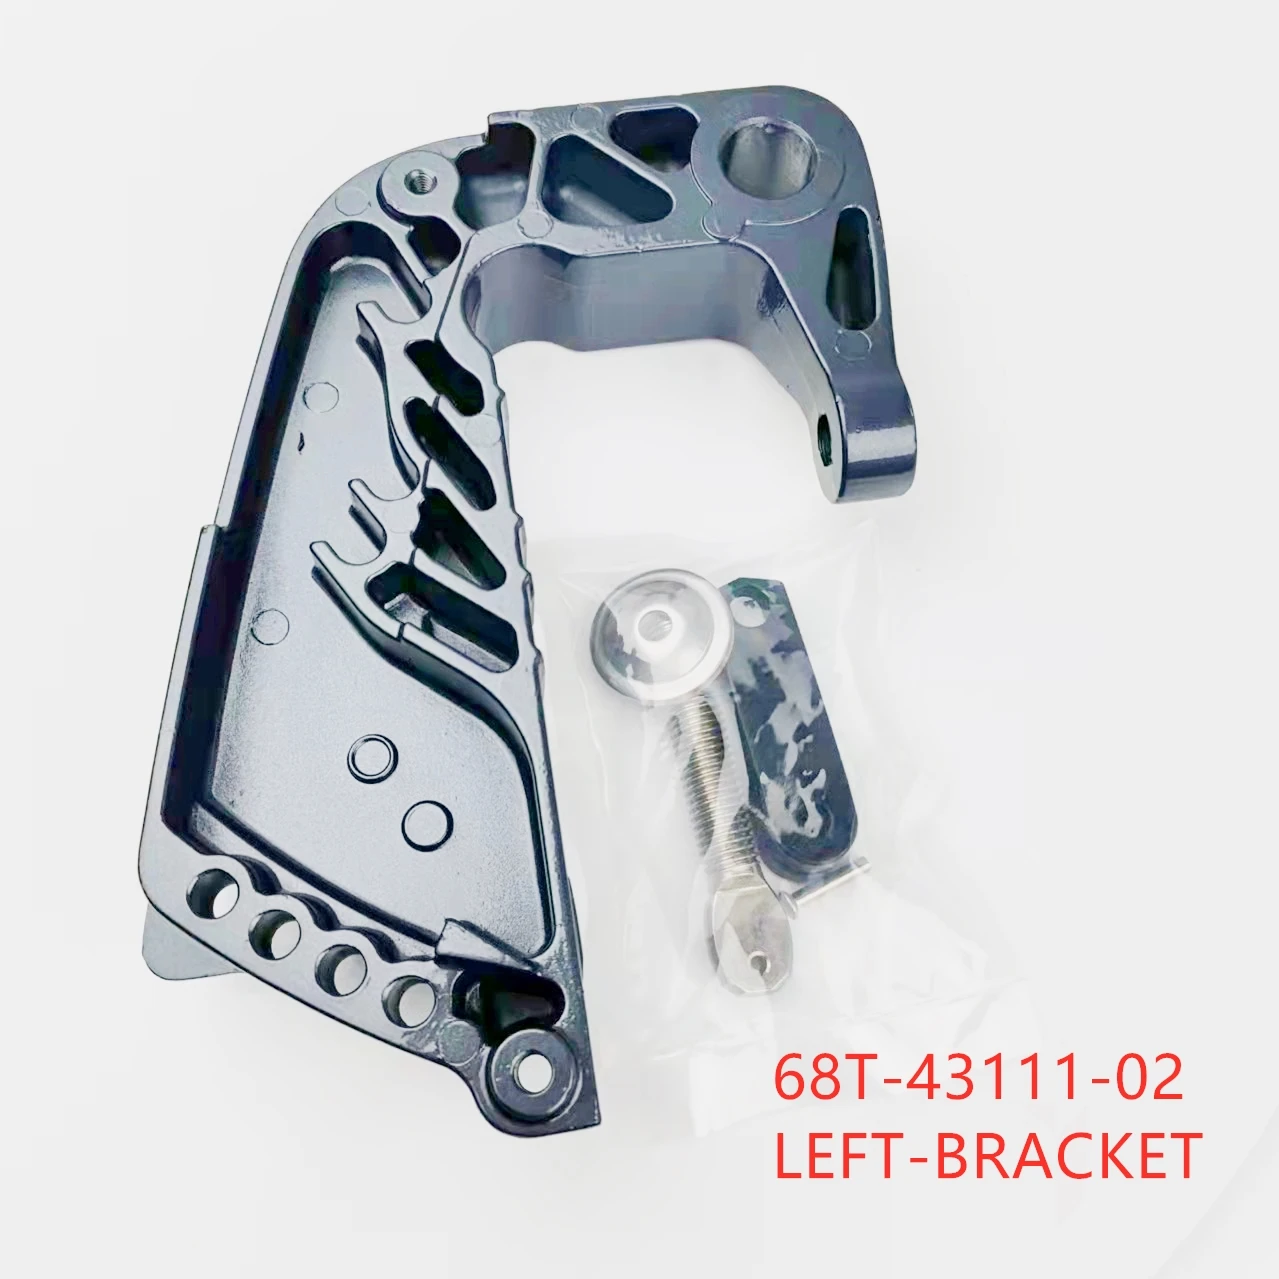 68T-43111-02-4D Right Bracket Clamp For Yamaha Outboard Motor 4T F8C; F6A;68R 69F 68T Series Engines Parsun HDX 68T-43111